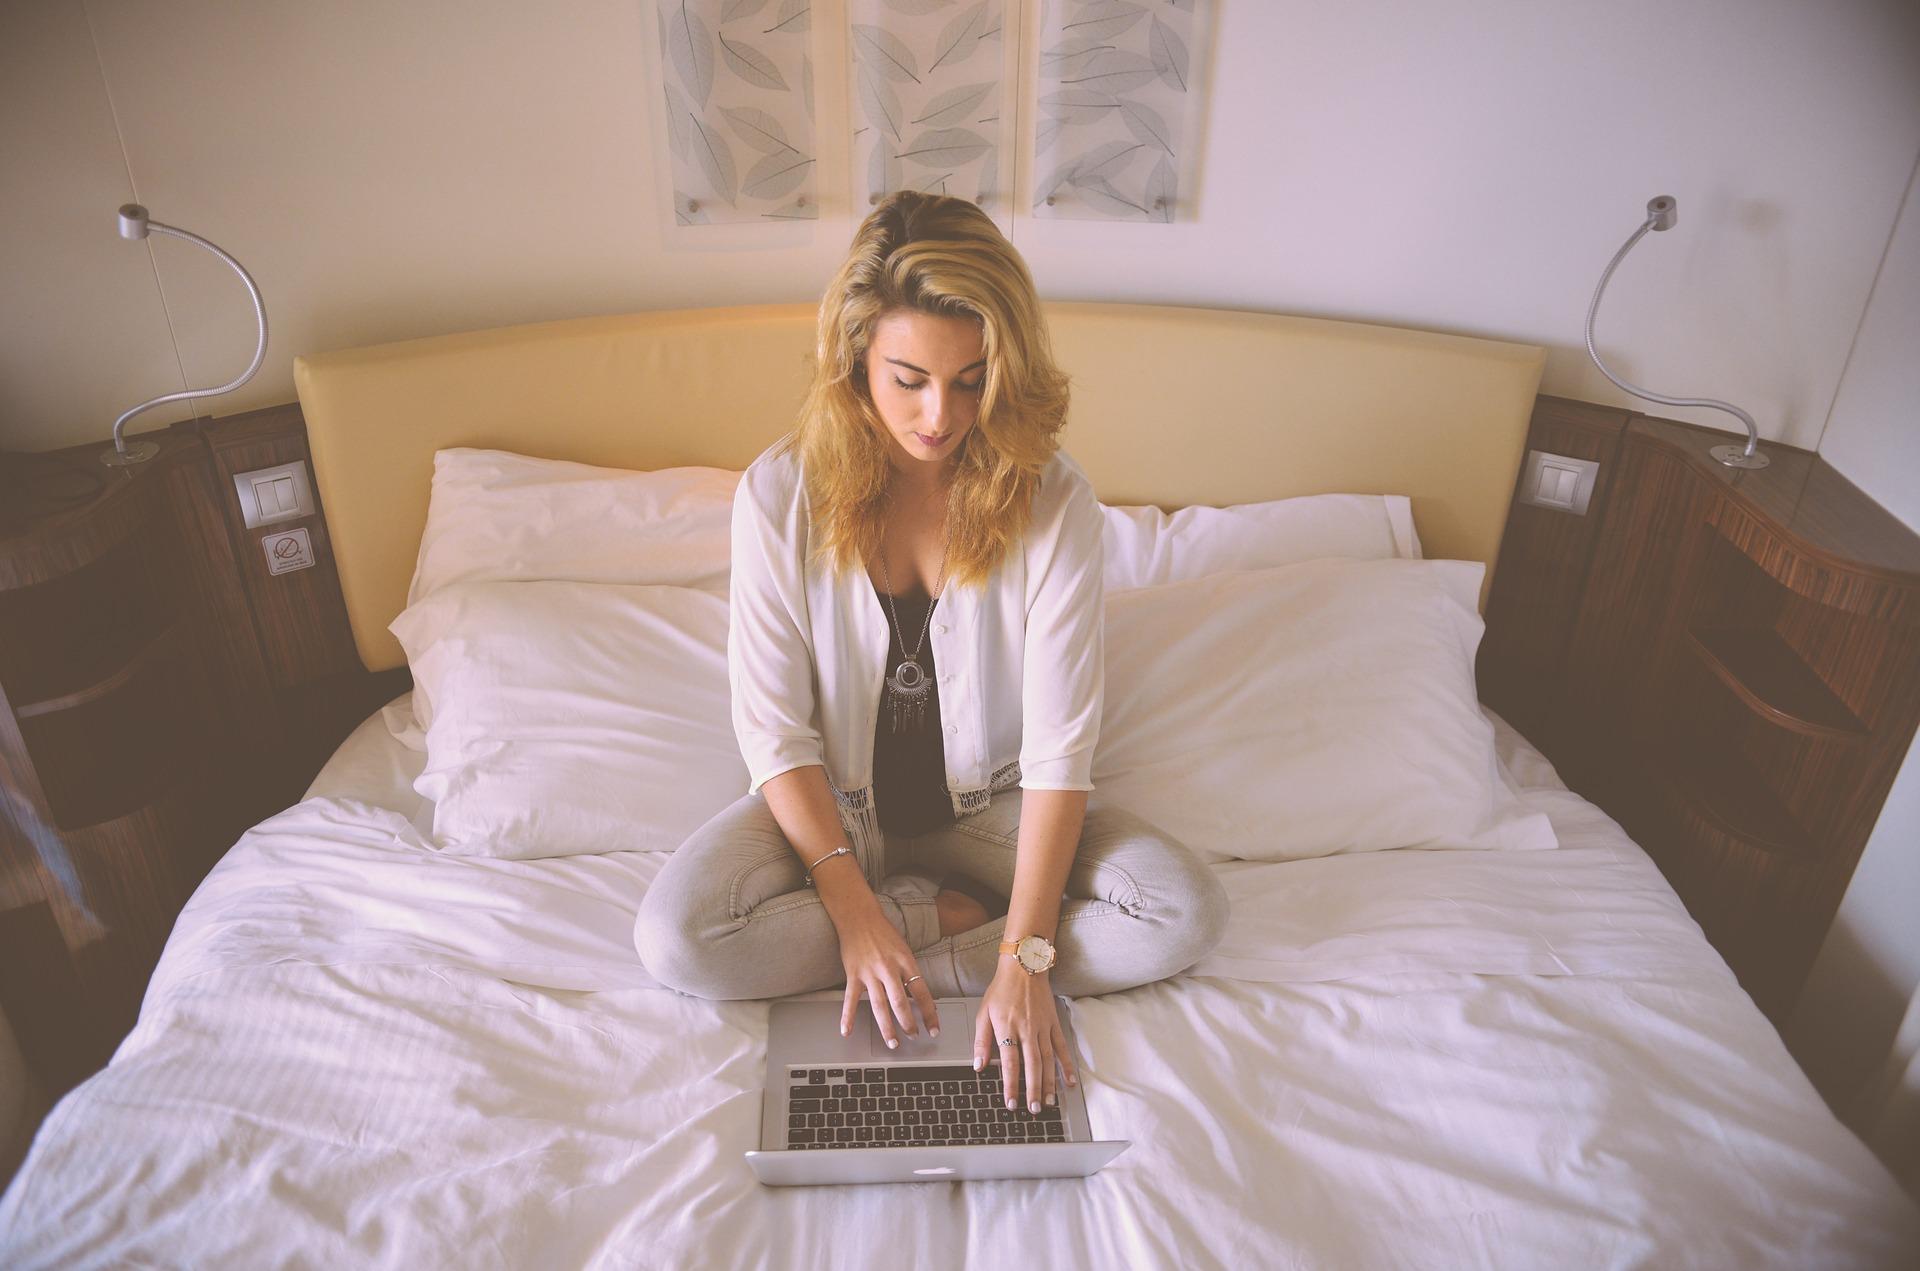 woman sitting on a bed working on a laptop